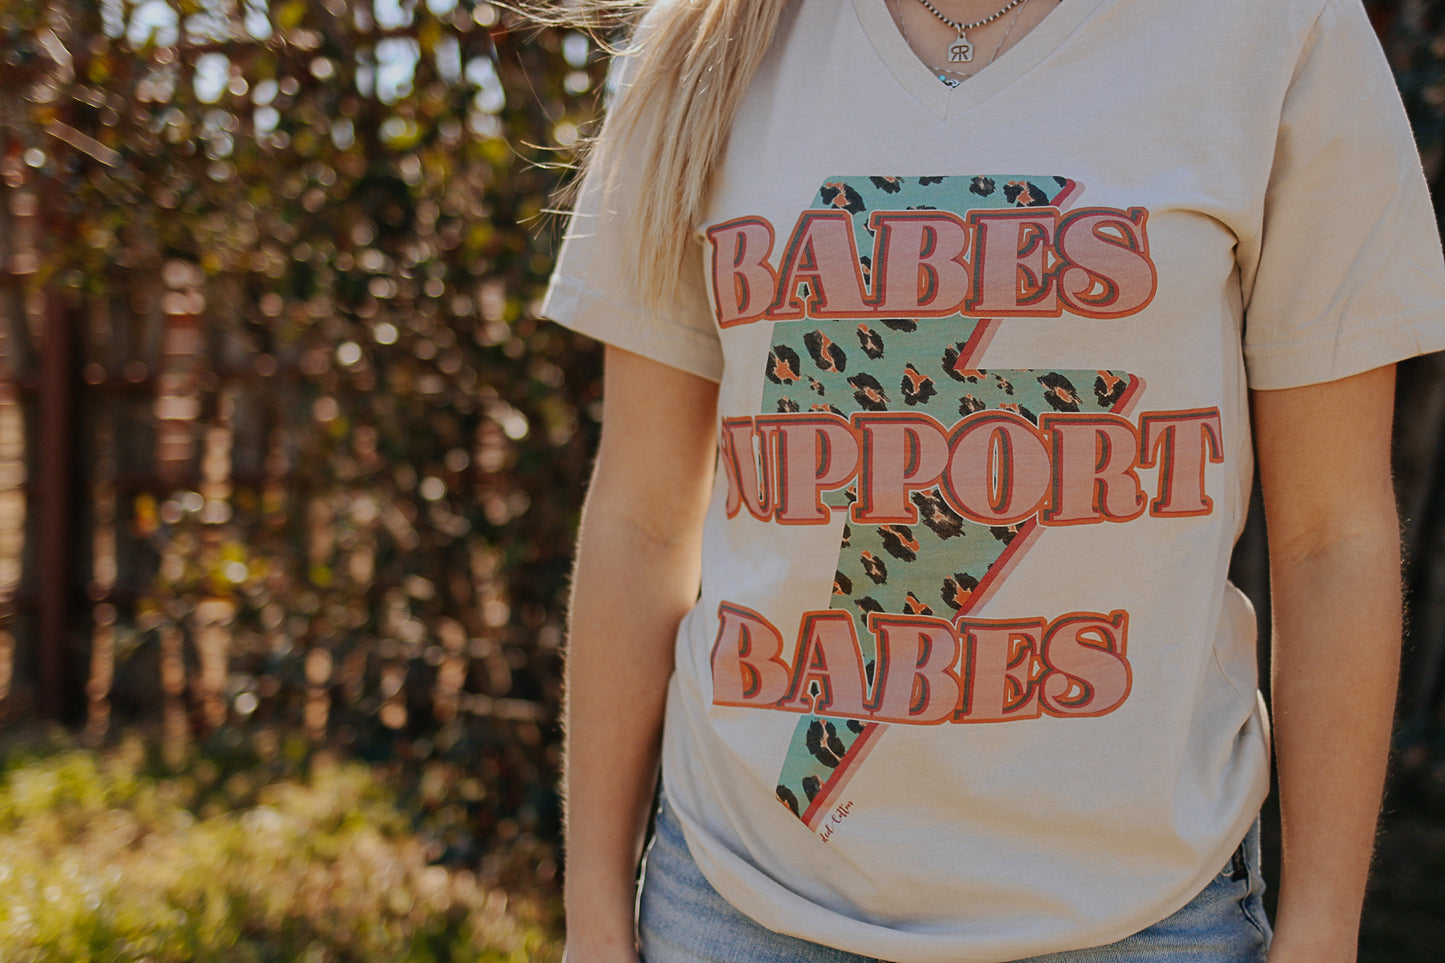 Babes support babes tee